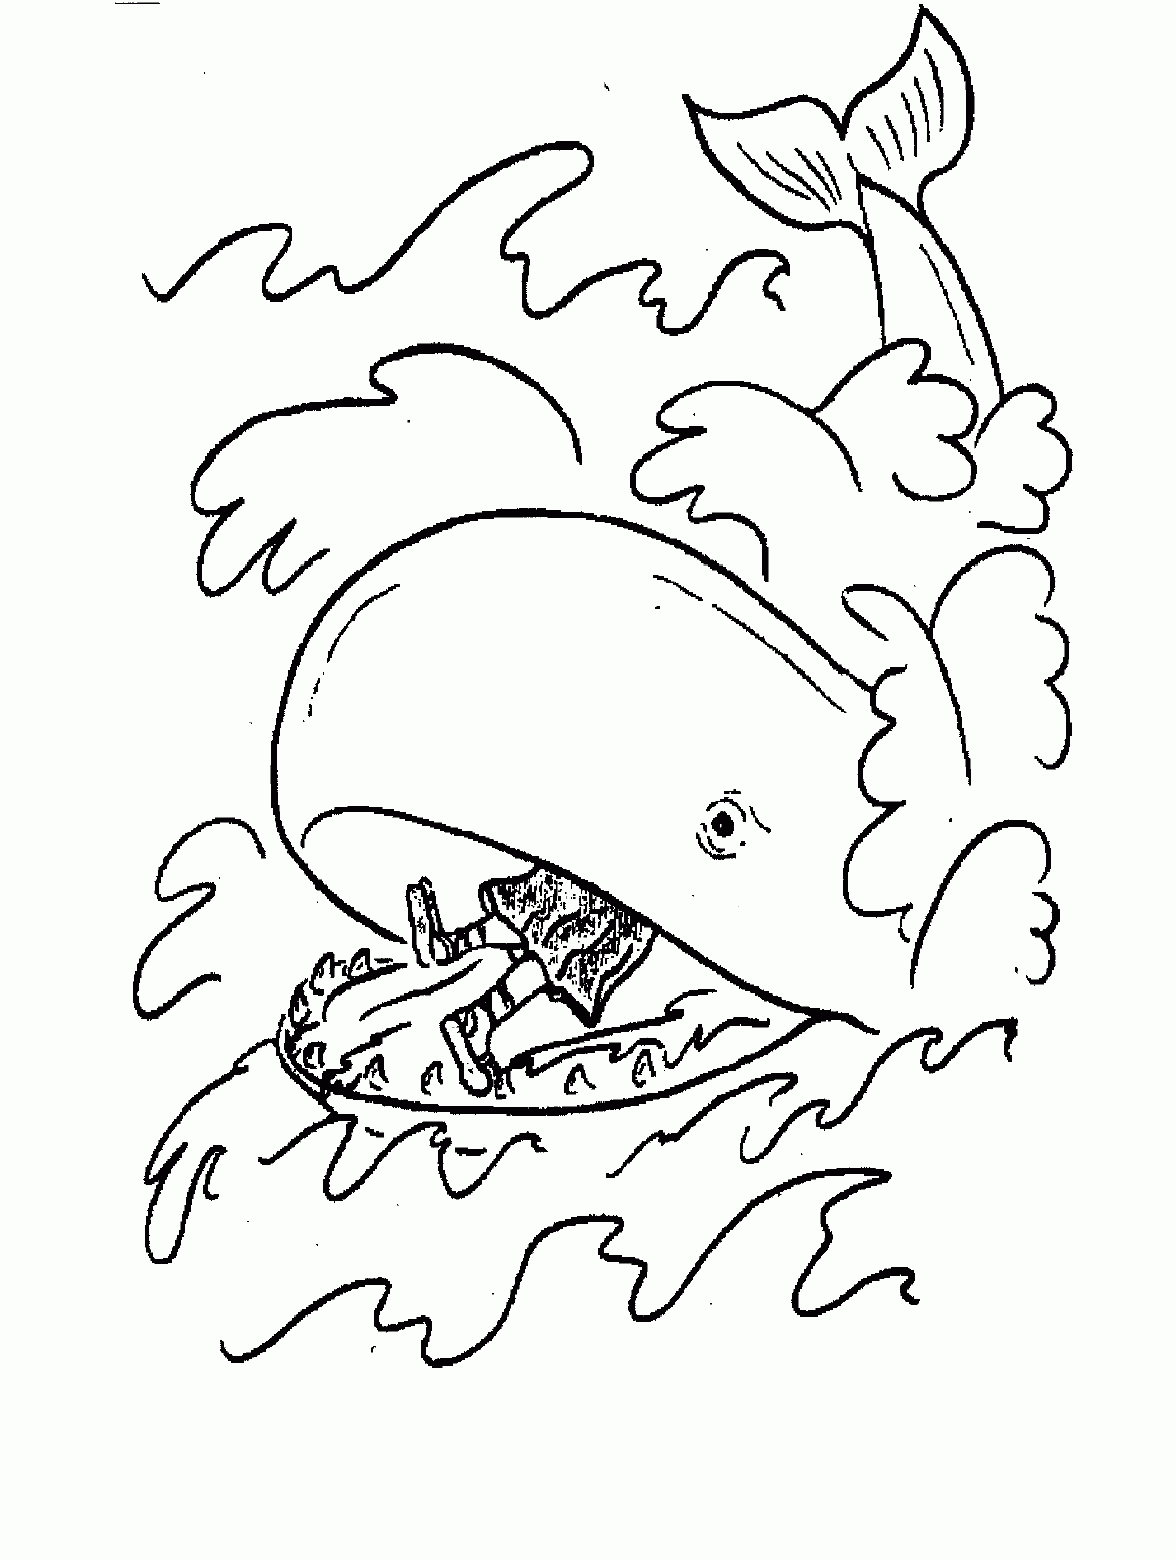 Free Printable Jonah and The Whale Coloring Pages For Kids